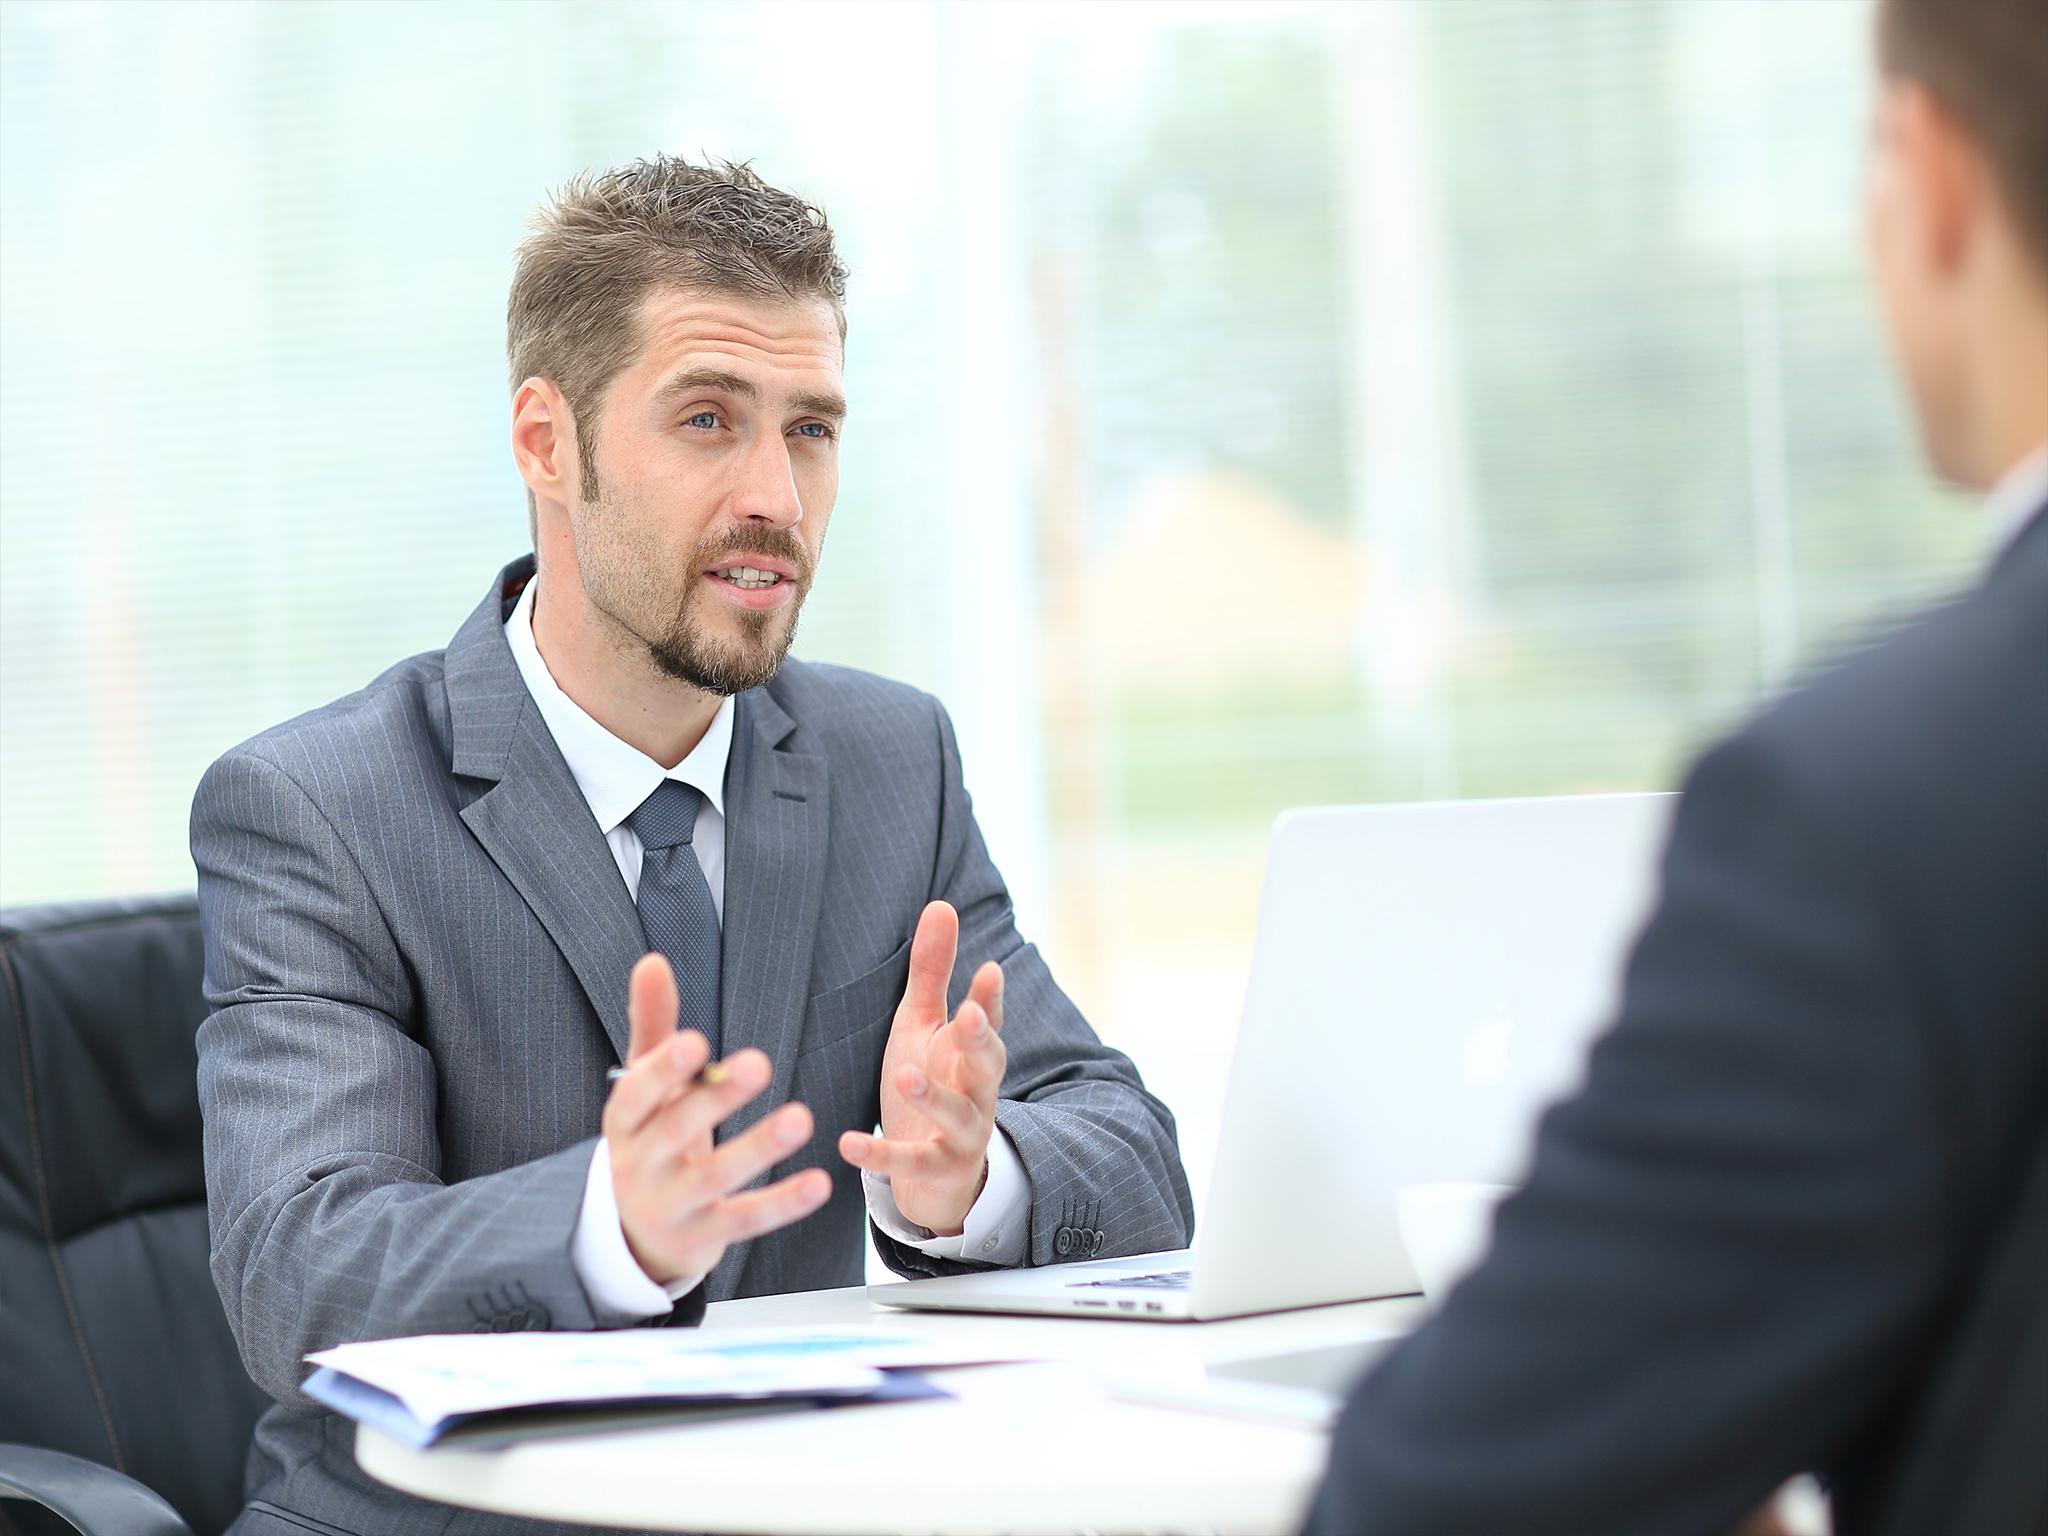 Good communication skills have been linked to greater career prospects Shutterstock/ASDF_MEDIA